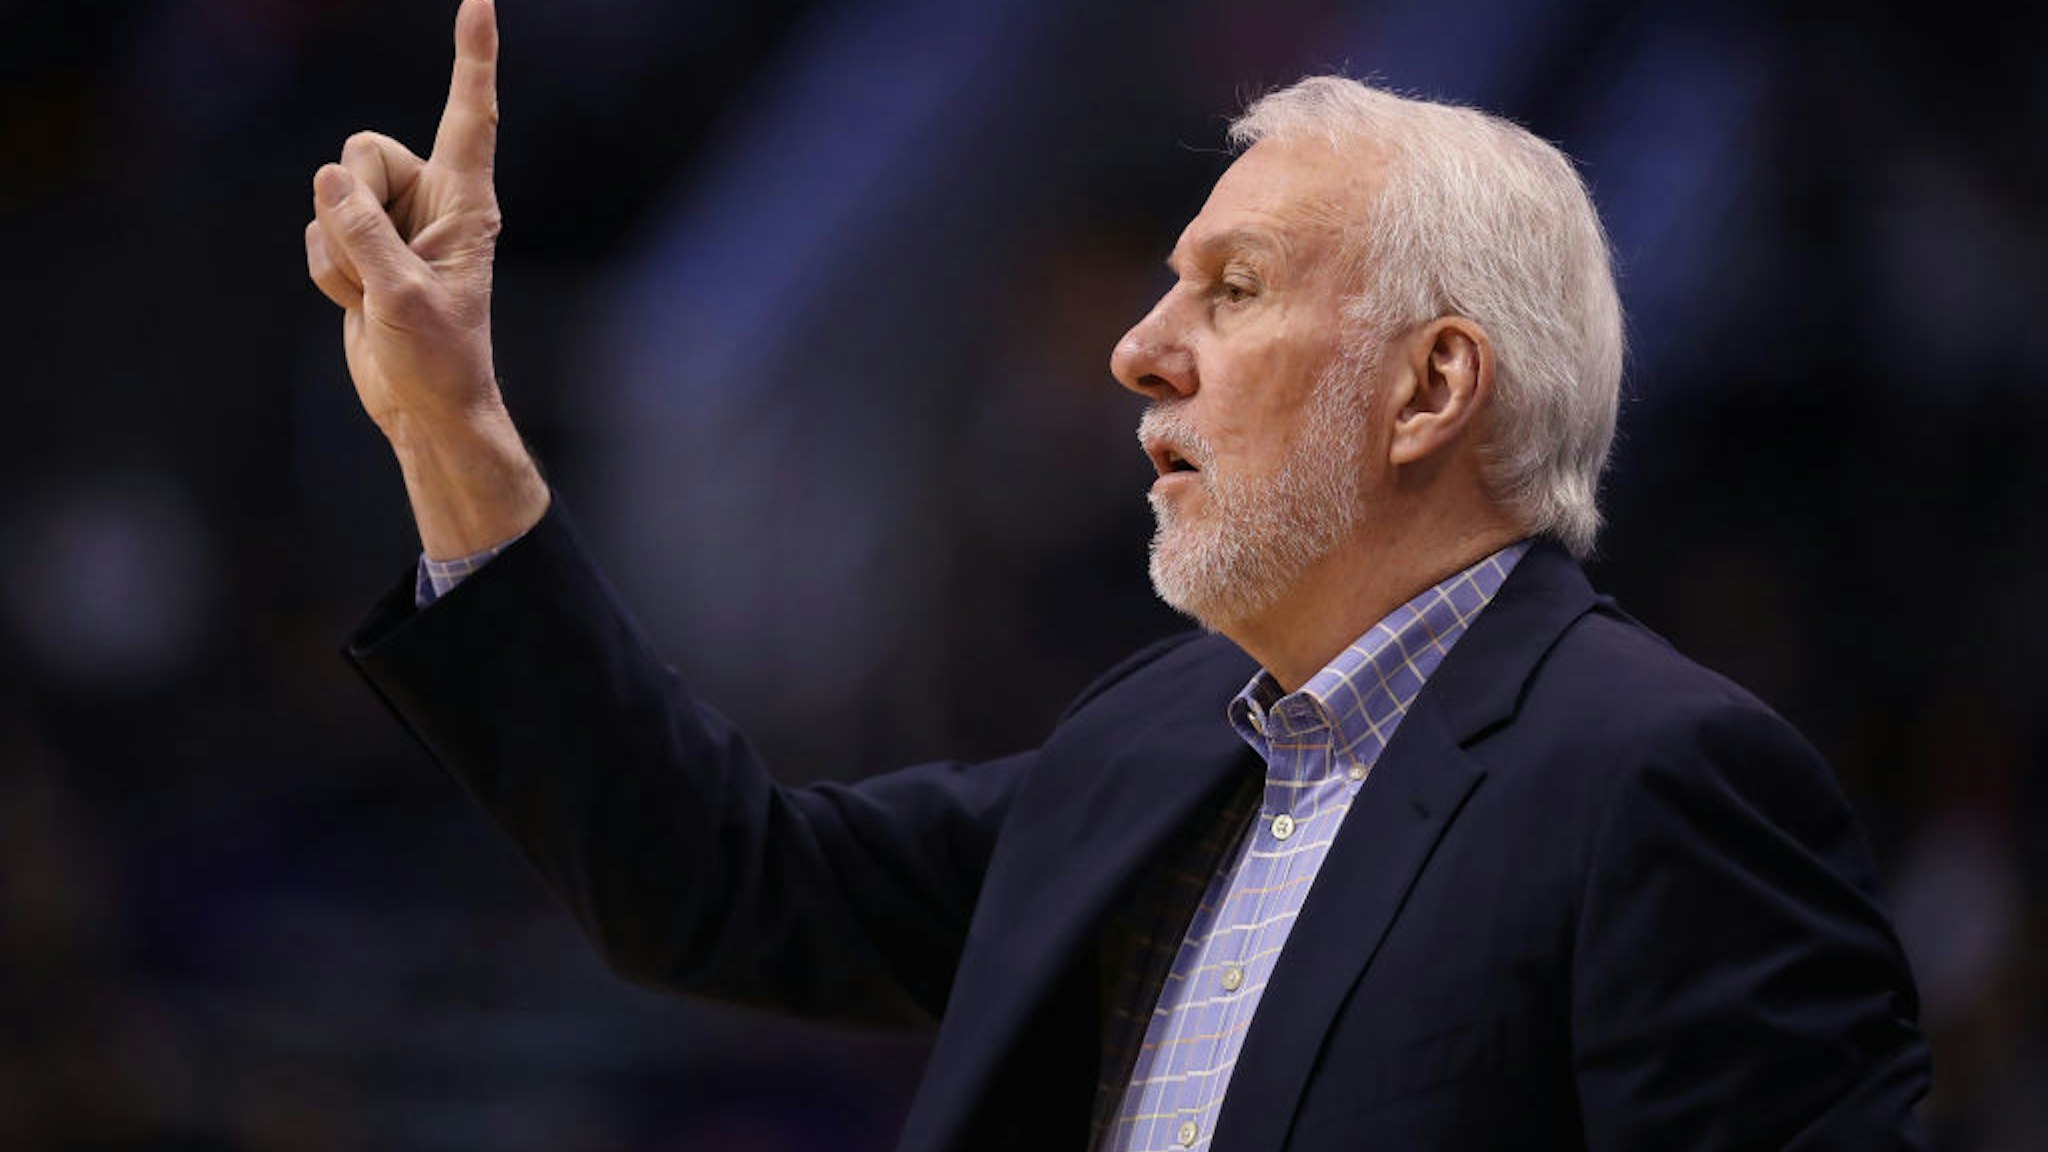 Head coach Gregg Popovich of the San Antonio Spurs calls a play during the first half of the NBA game against the Phoenix Suns at Talking Stick Resort Arena on January 20, 2020 in Phoenix, Arizona.